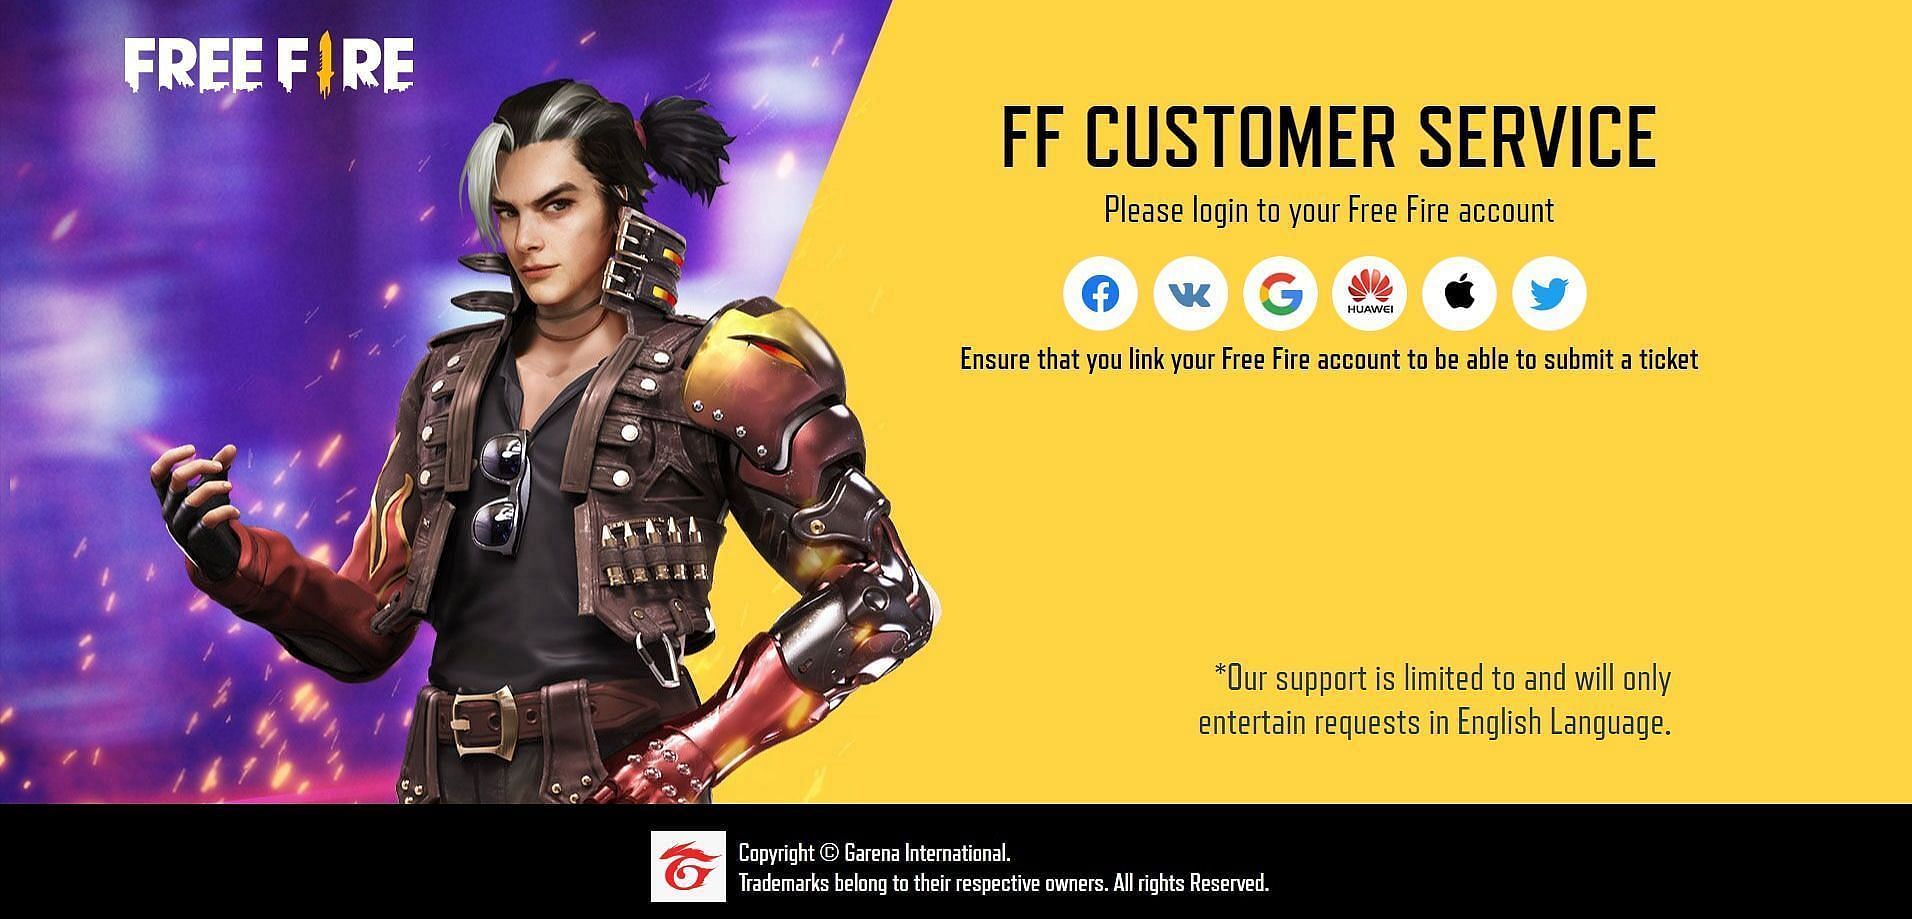 Users must link their FF IDs to proceed (Image via Garena)